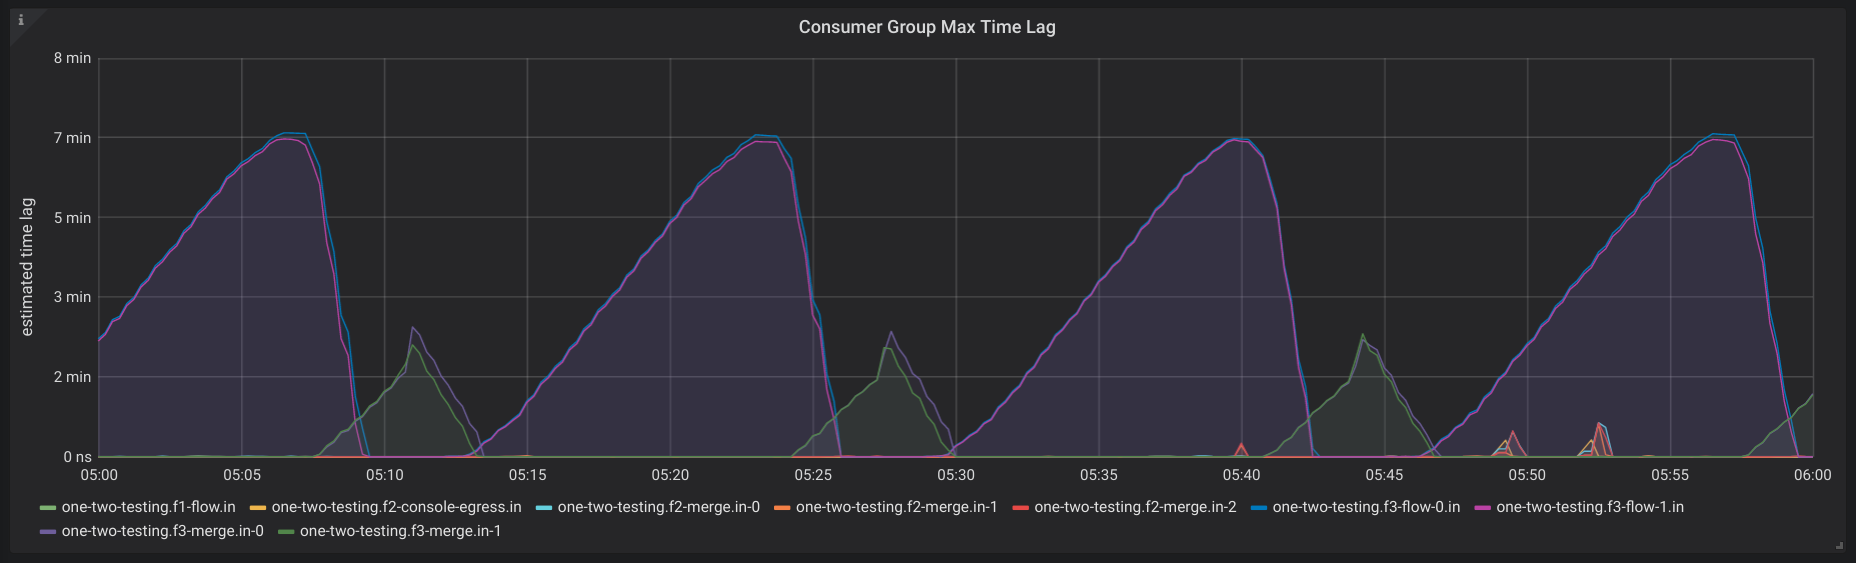 Consumer Group Max Time Lag